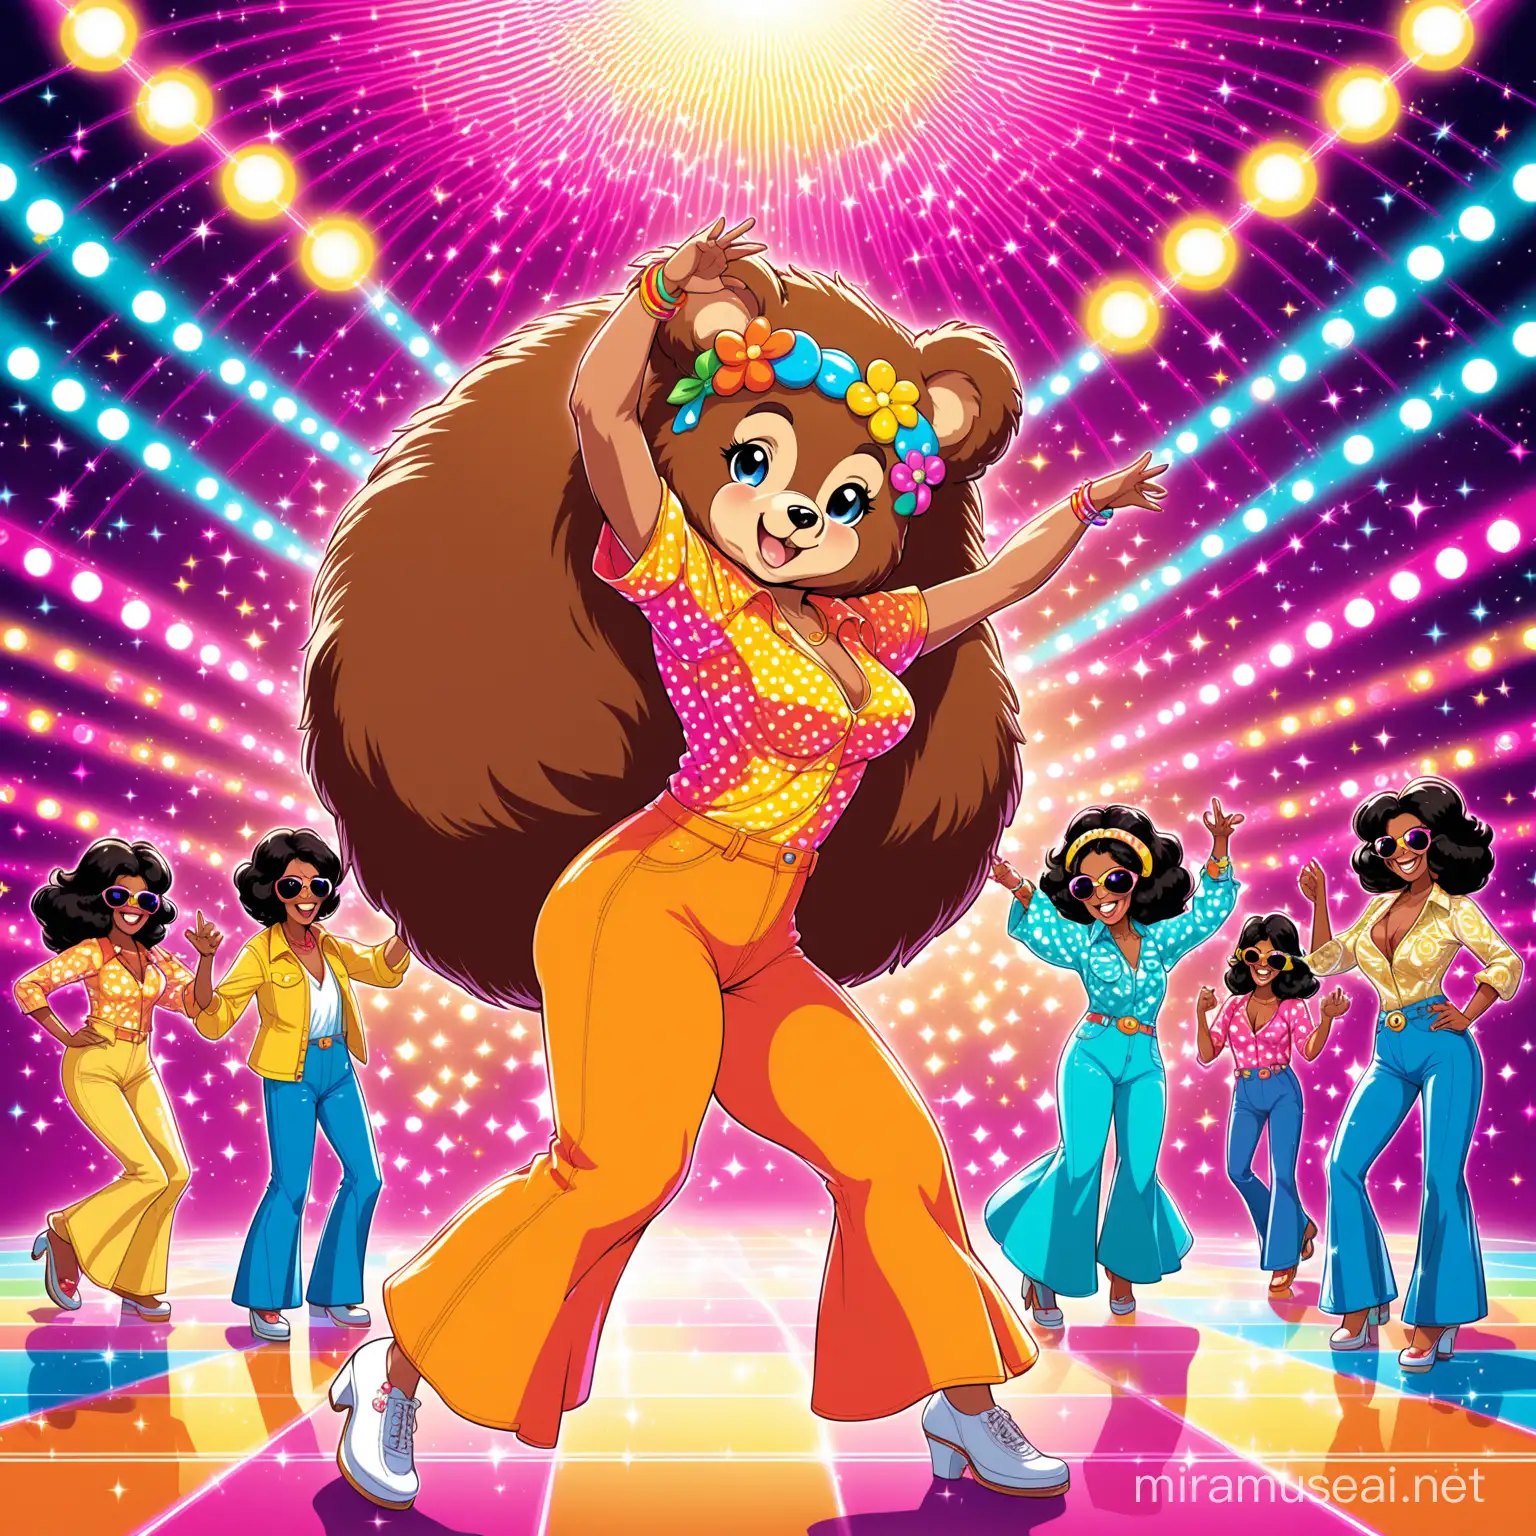 A vibrant and retro-inspired anime illustration of a playful mama bear with a groovy and funky style. She is dressed in fashionable clothing from the 70s era, with a colorful flower headband and bell-bottom jeans, and is dancing with a cheerful smile. The background features a lively disco scene with a colorful dance floor, disco ball, and other animated characters swaying to the rhythm. The overall vibe is upbeat and nostalgic, capturing the essence of the groovy era.